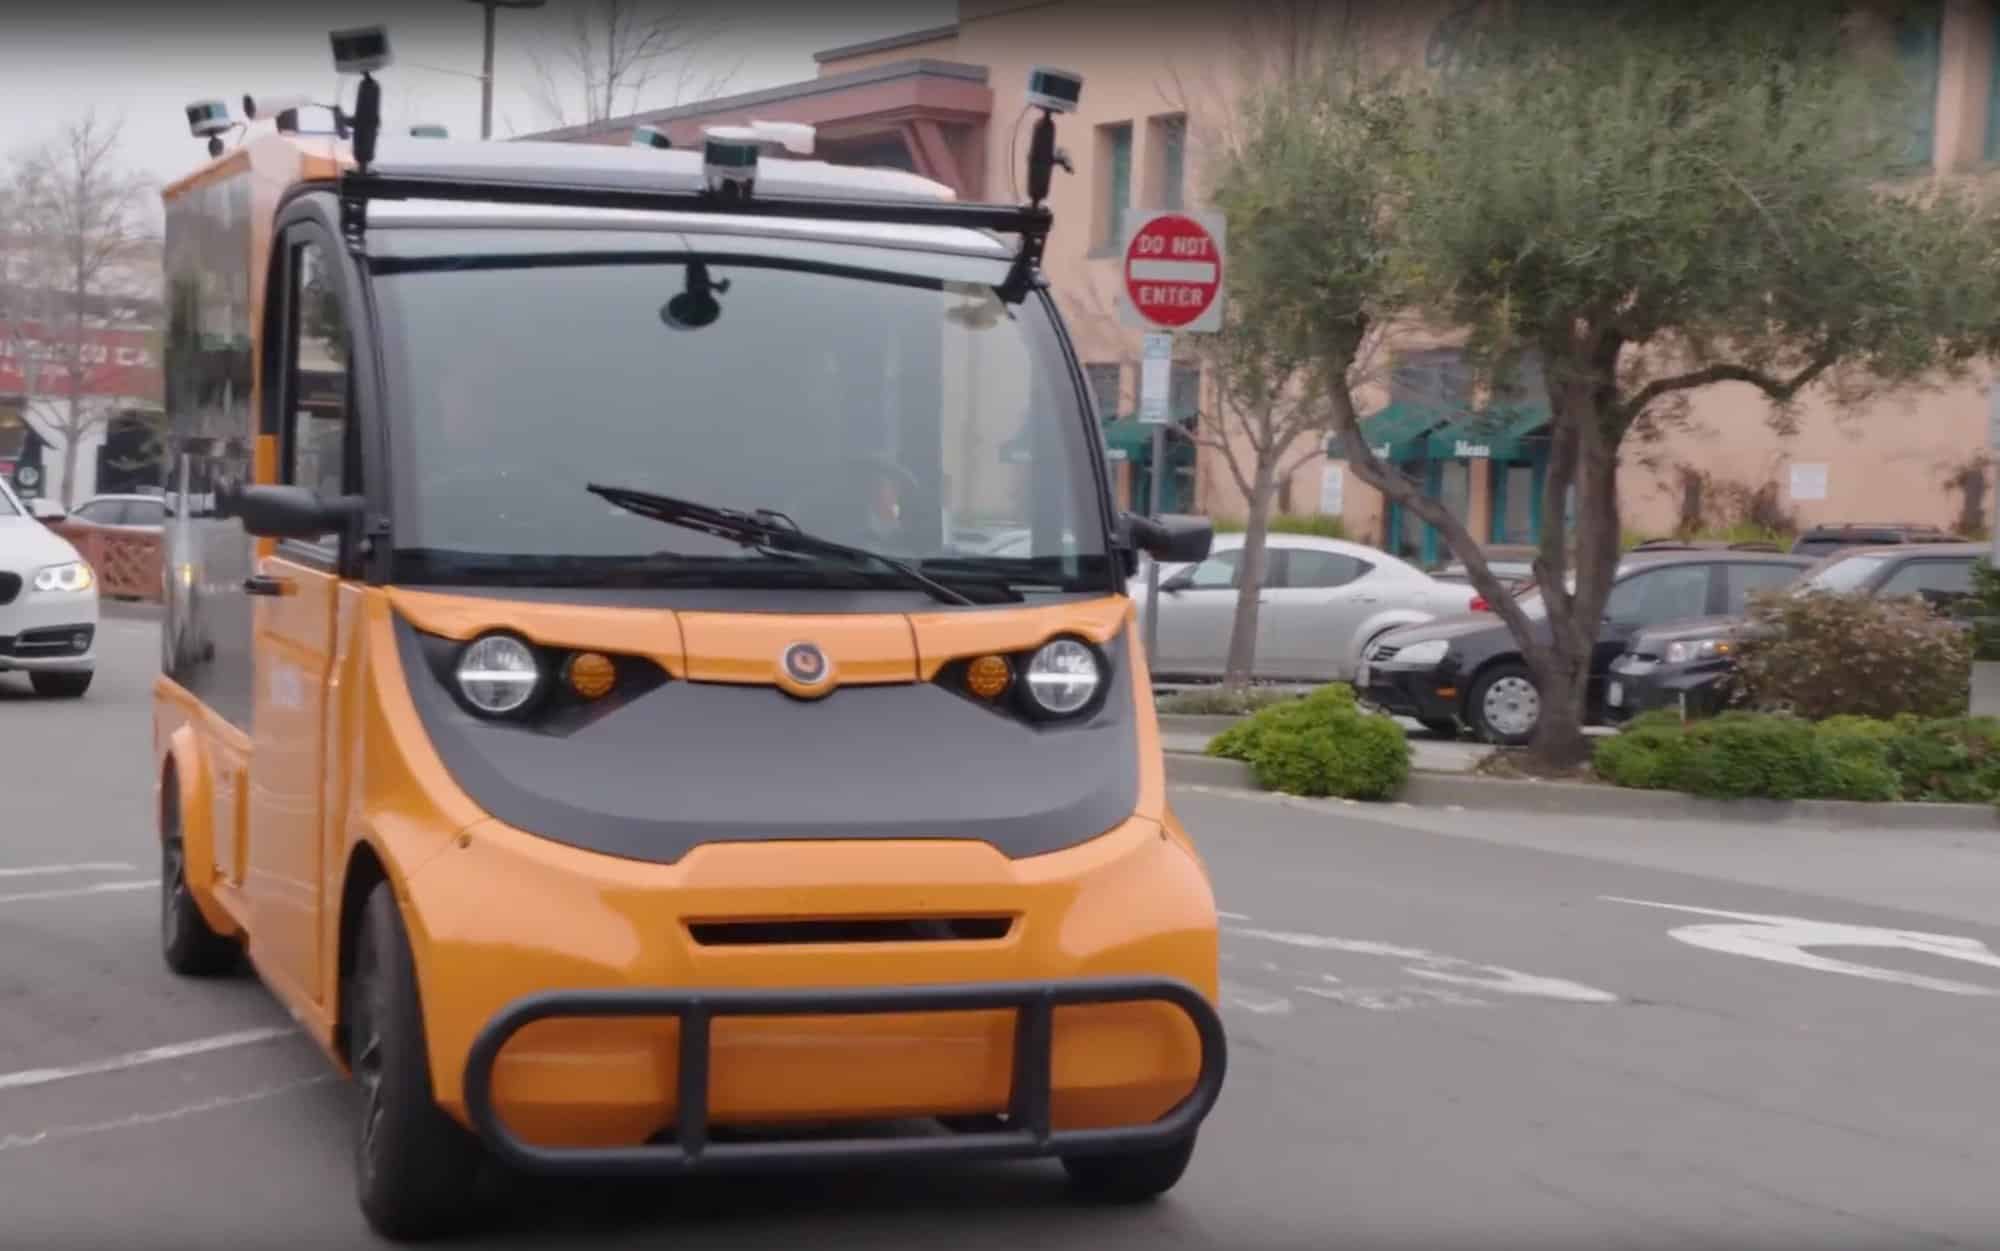 World’s largest driverless grocery delivery signed up